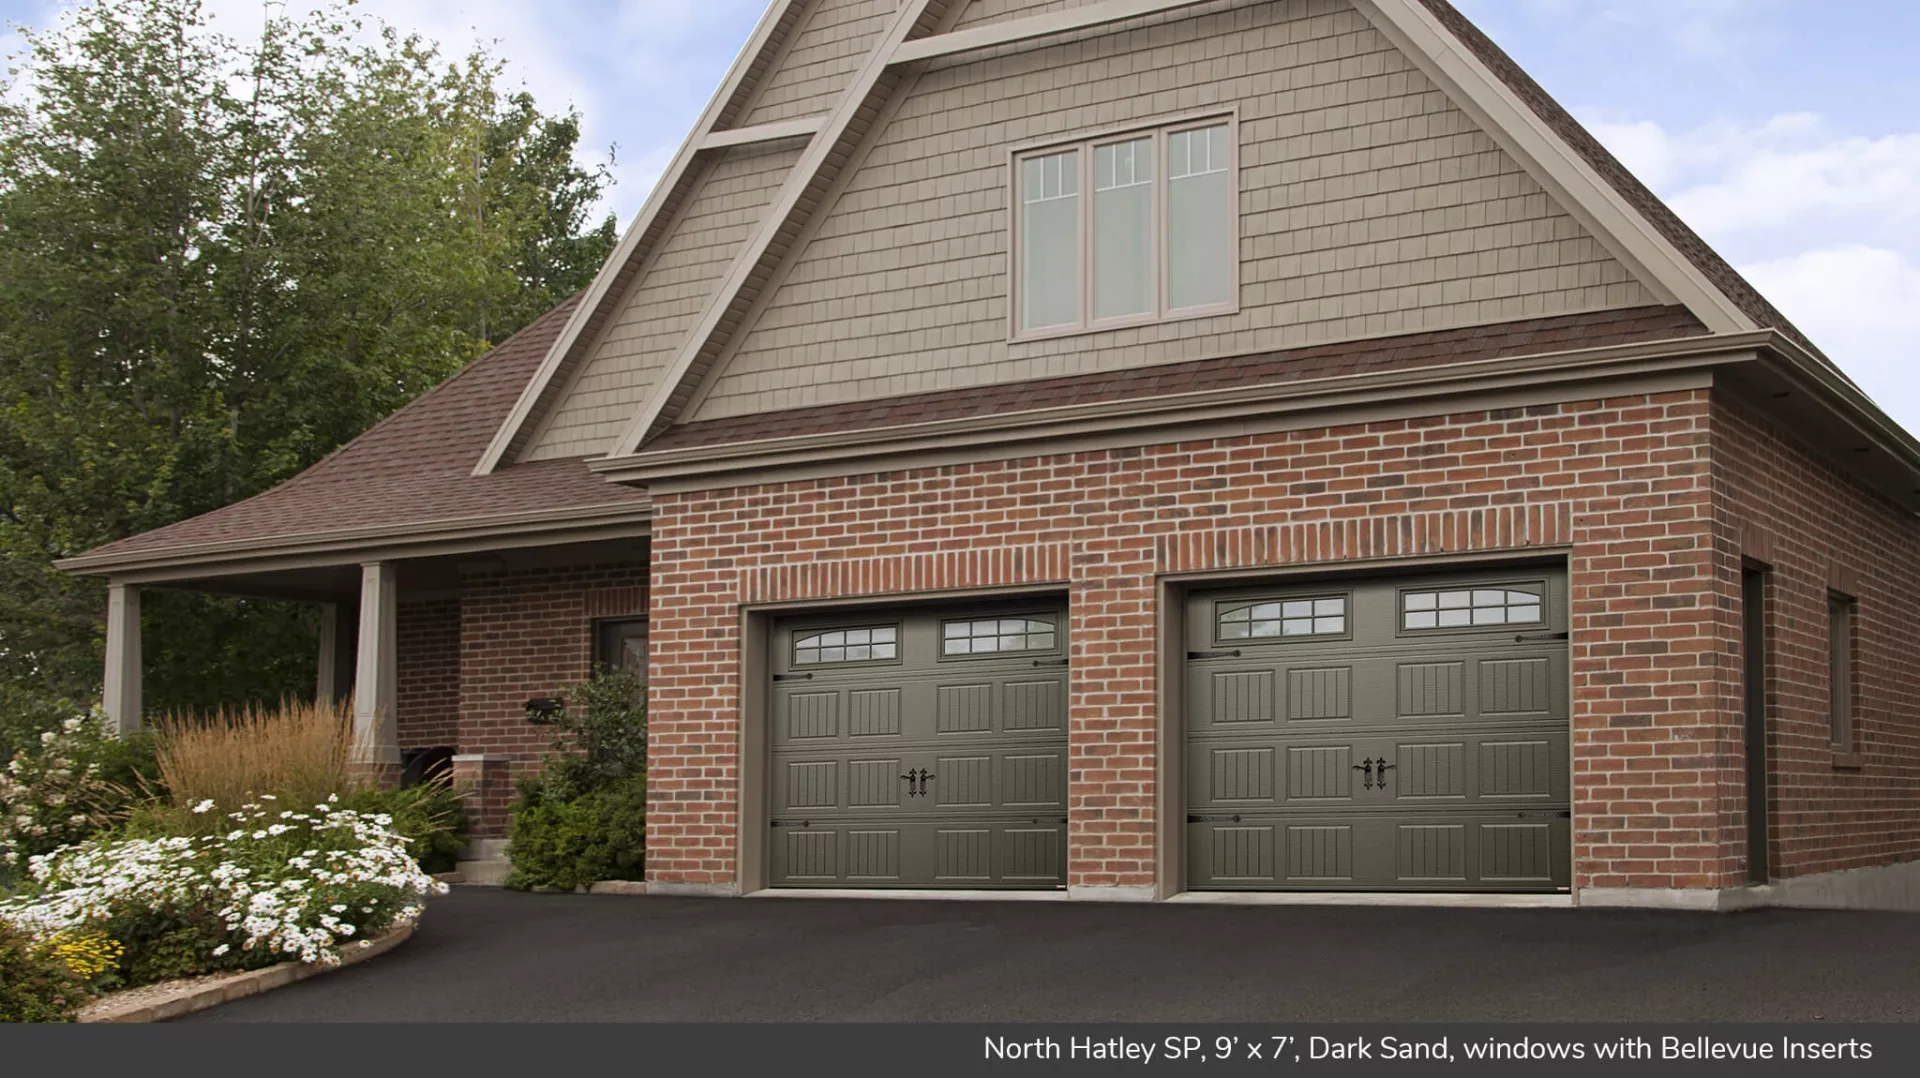 North Hatley SP for a Carriage House style